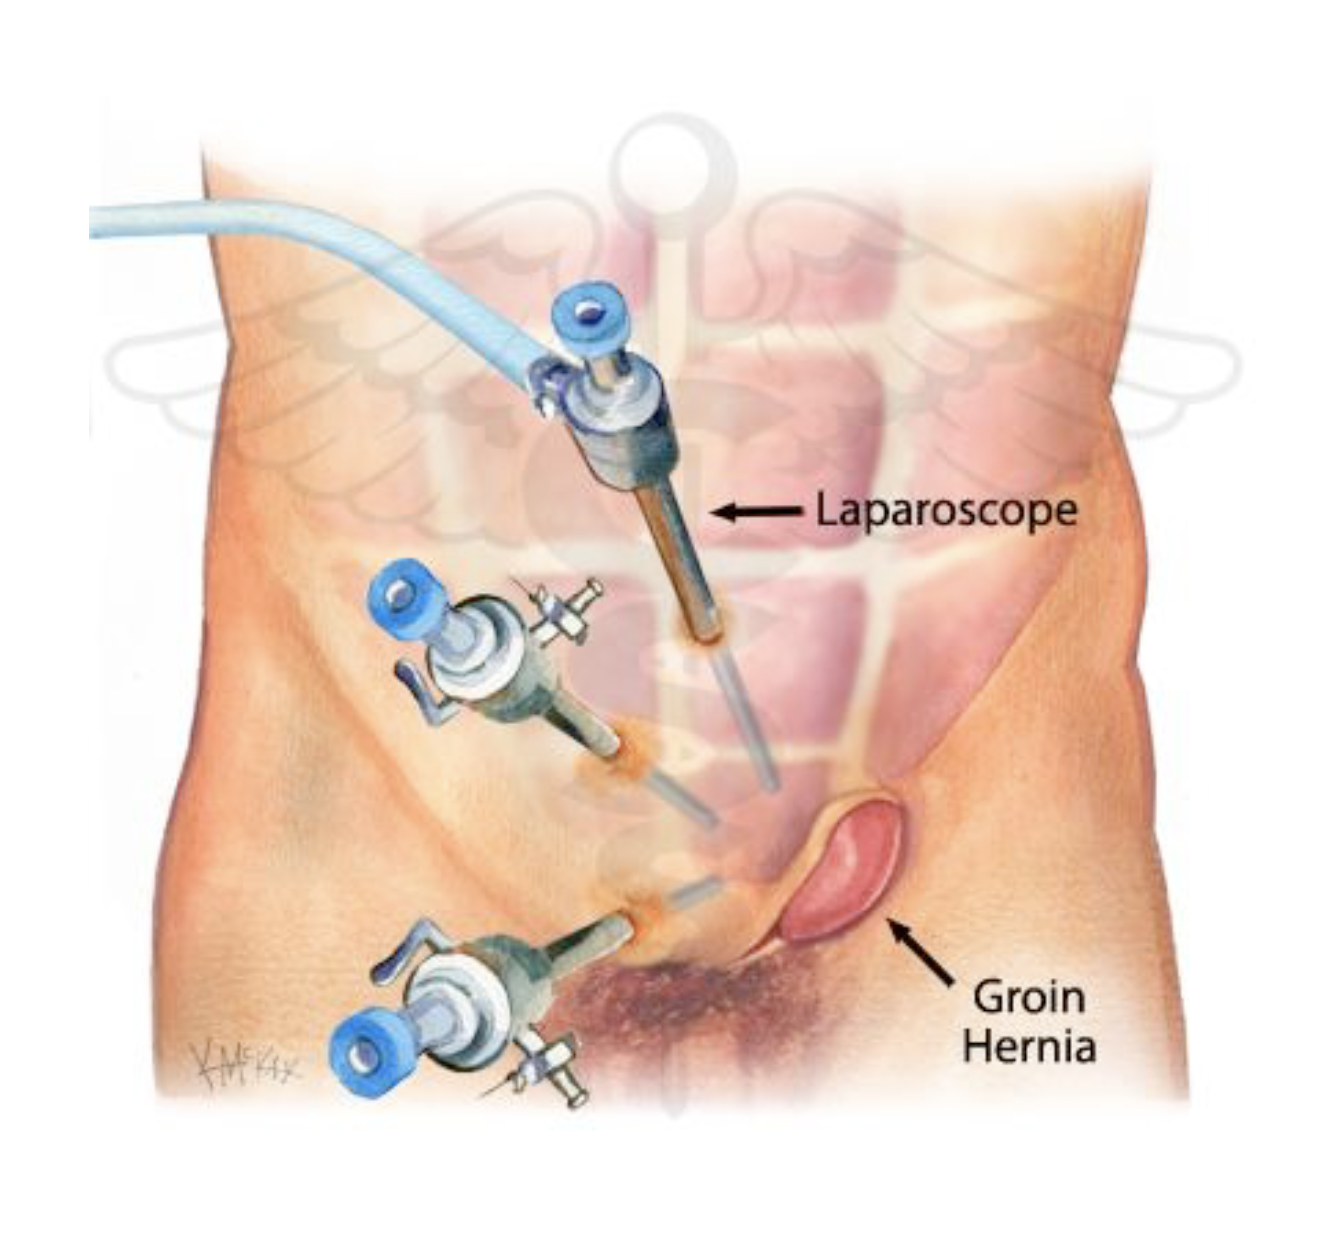 Which is a better option for Inguinal hernia: Open or Laparoscopic surgery?